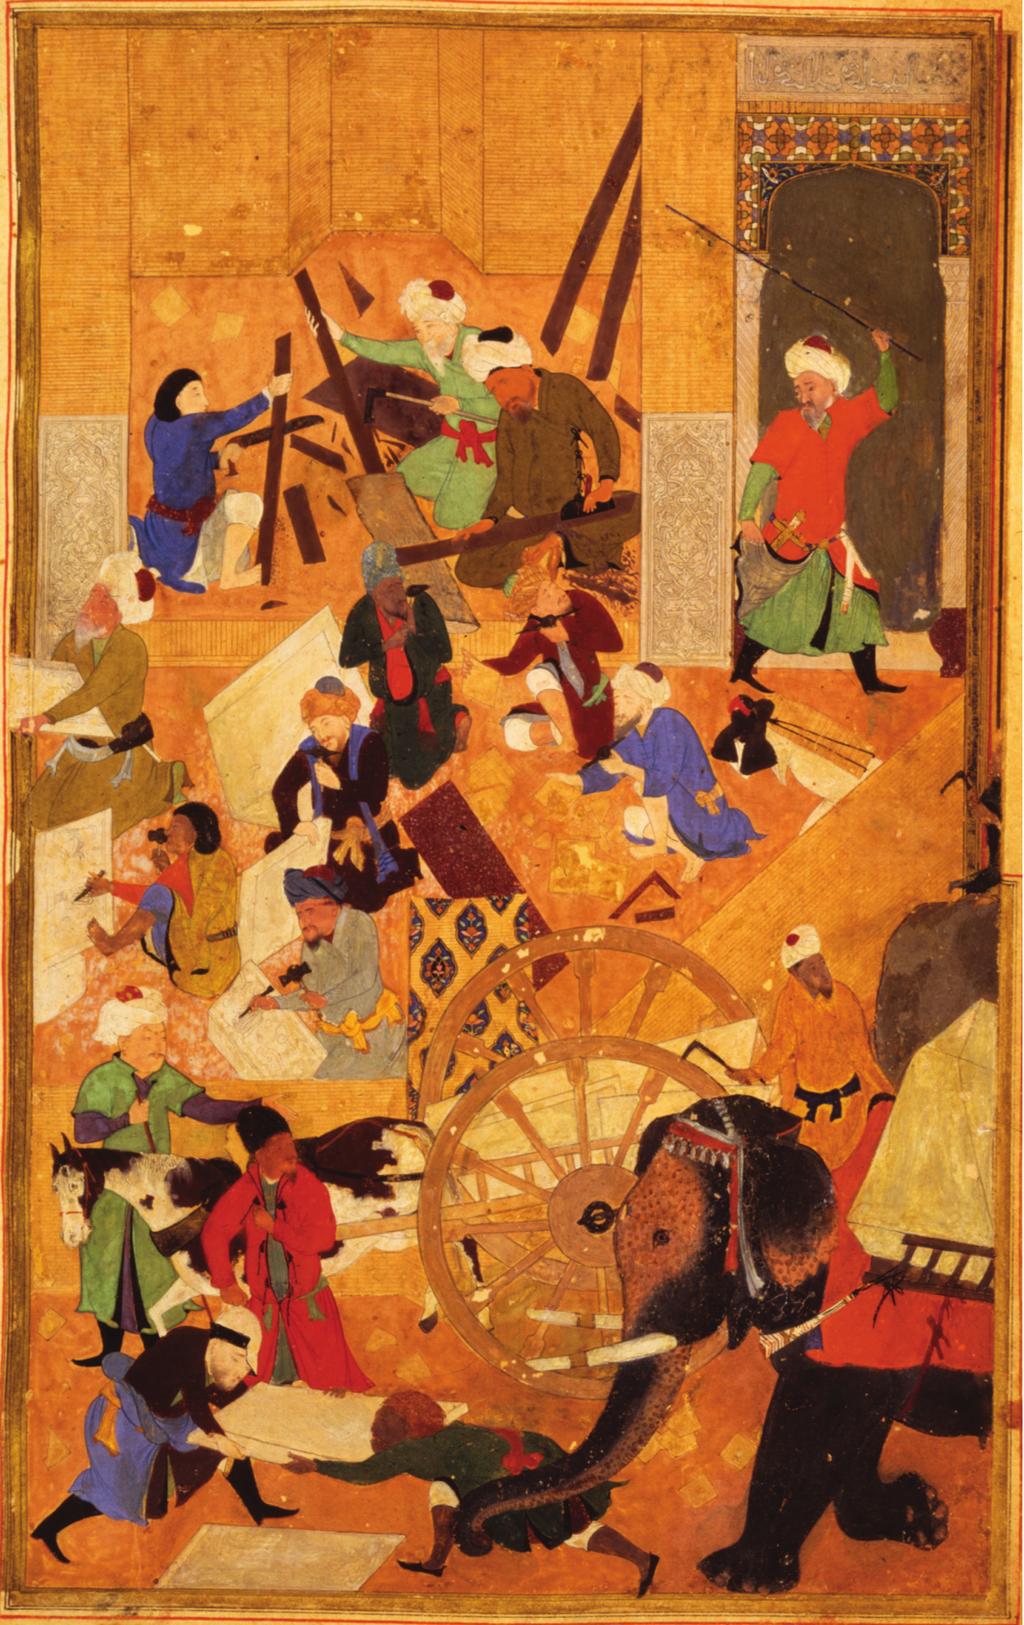 j 390 j M A A R T E N P R A K Figure 1. Workers of different ethnic backgrounds collaborate on the building of the Masjid- i jami mosque (now called Bibi Khanum) in Samarqand, which was built c.